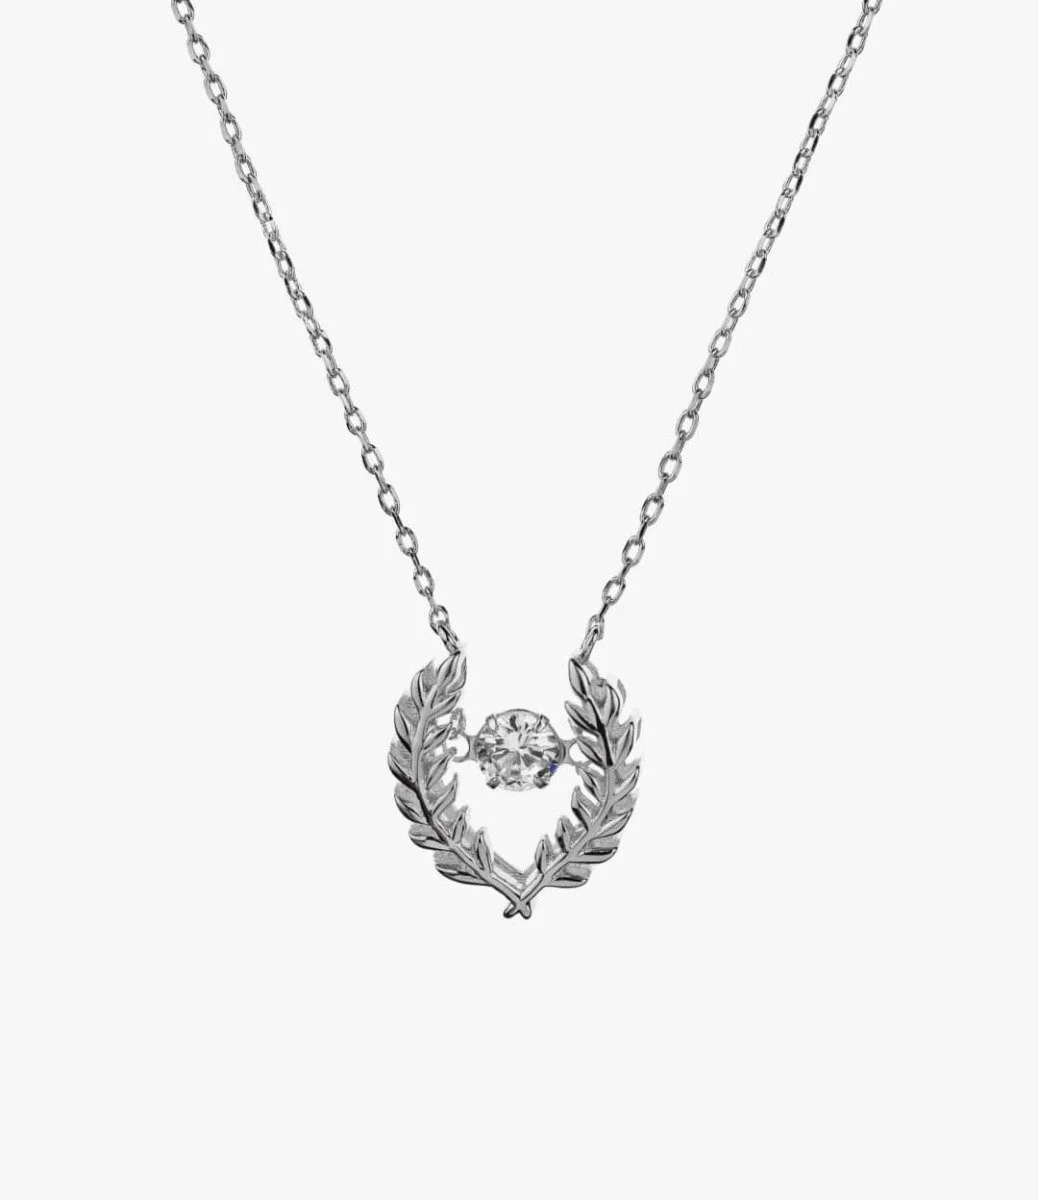 Gold-Plated Peaceful Necklace - White Gold